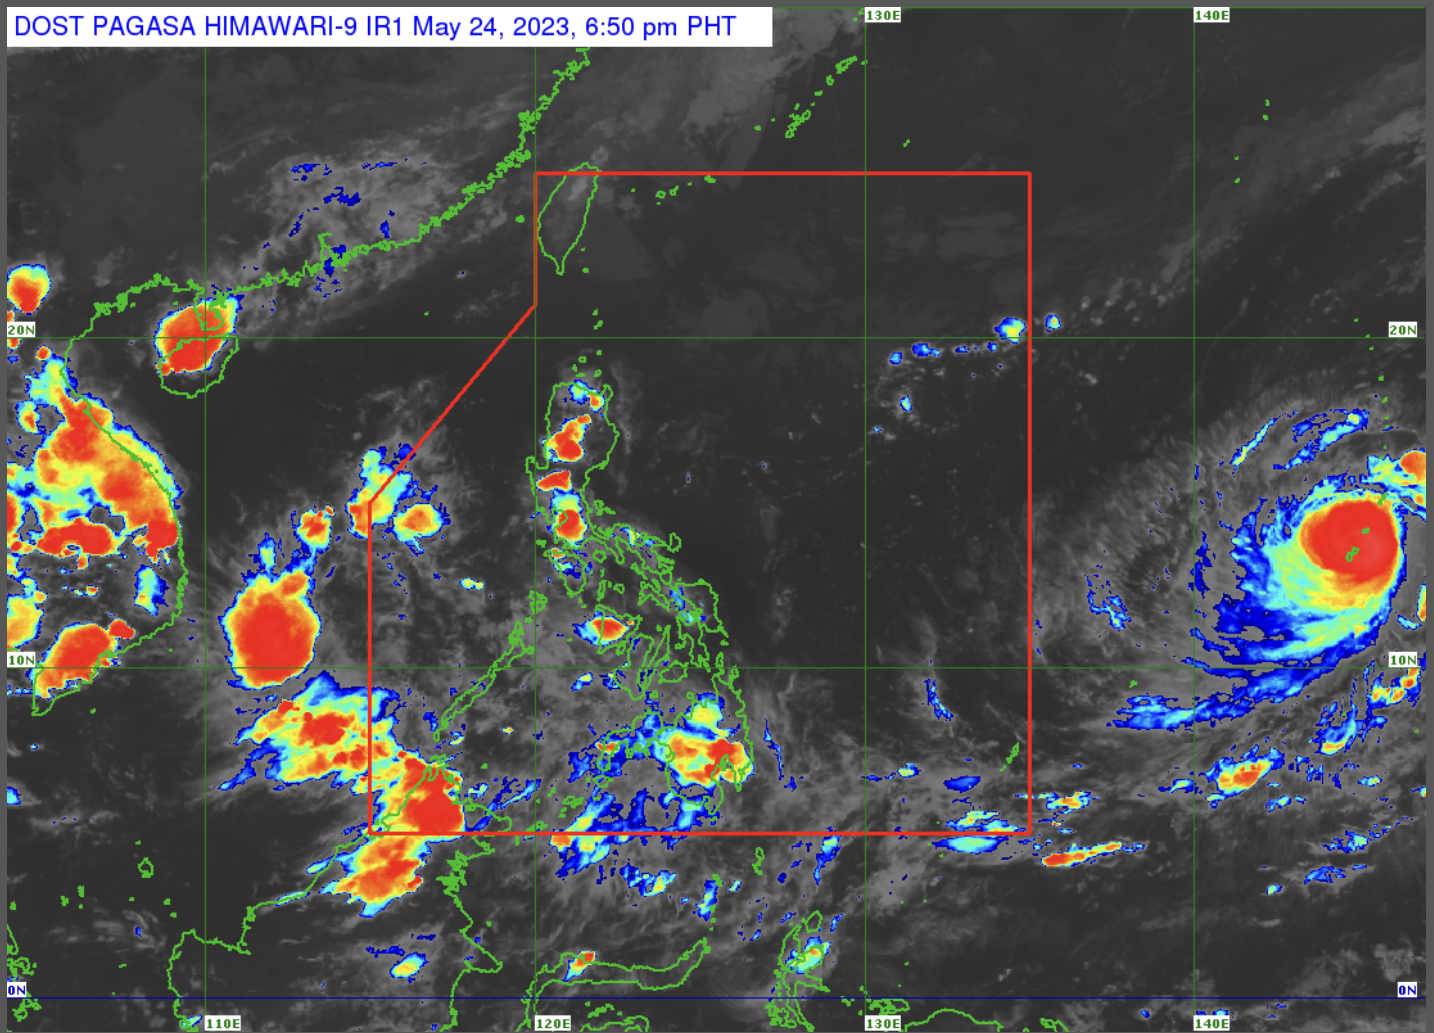 Screen Shot 2023-05-24 at 7.14.14 PM.png
Rain showers are expected to prevail in the western parts of the country due to the southwesterly wind flow, while Typhoon ‘Mawar’ remains outside the Philippine area of responsibility (PAR), the state weather bureau said on Wednesday afternoon.